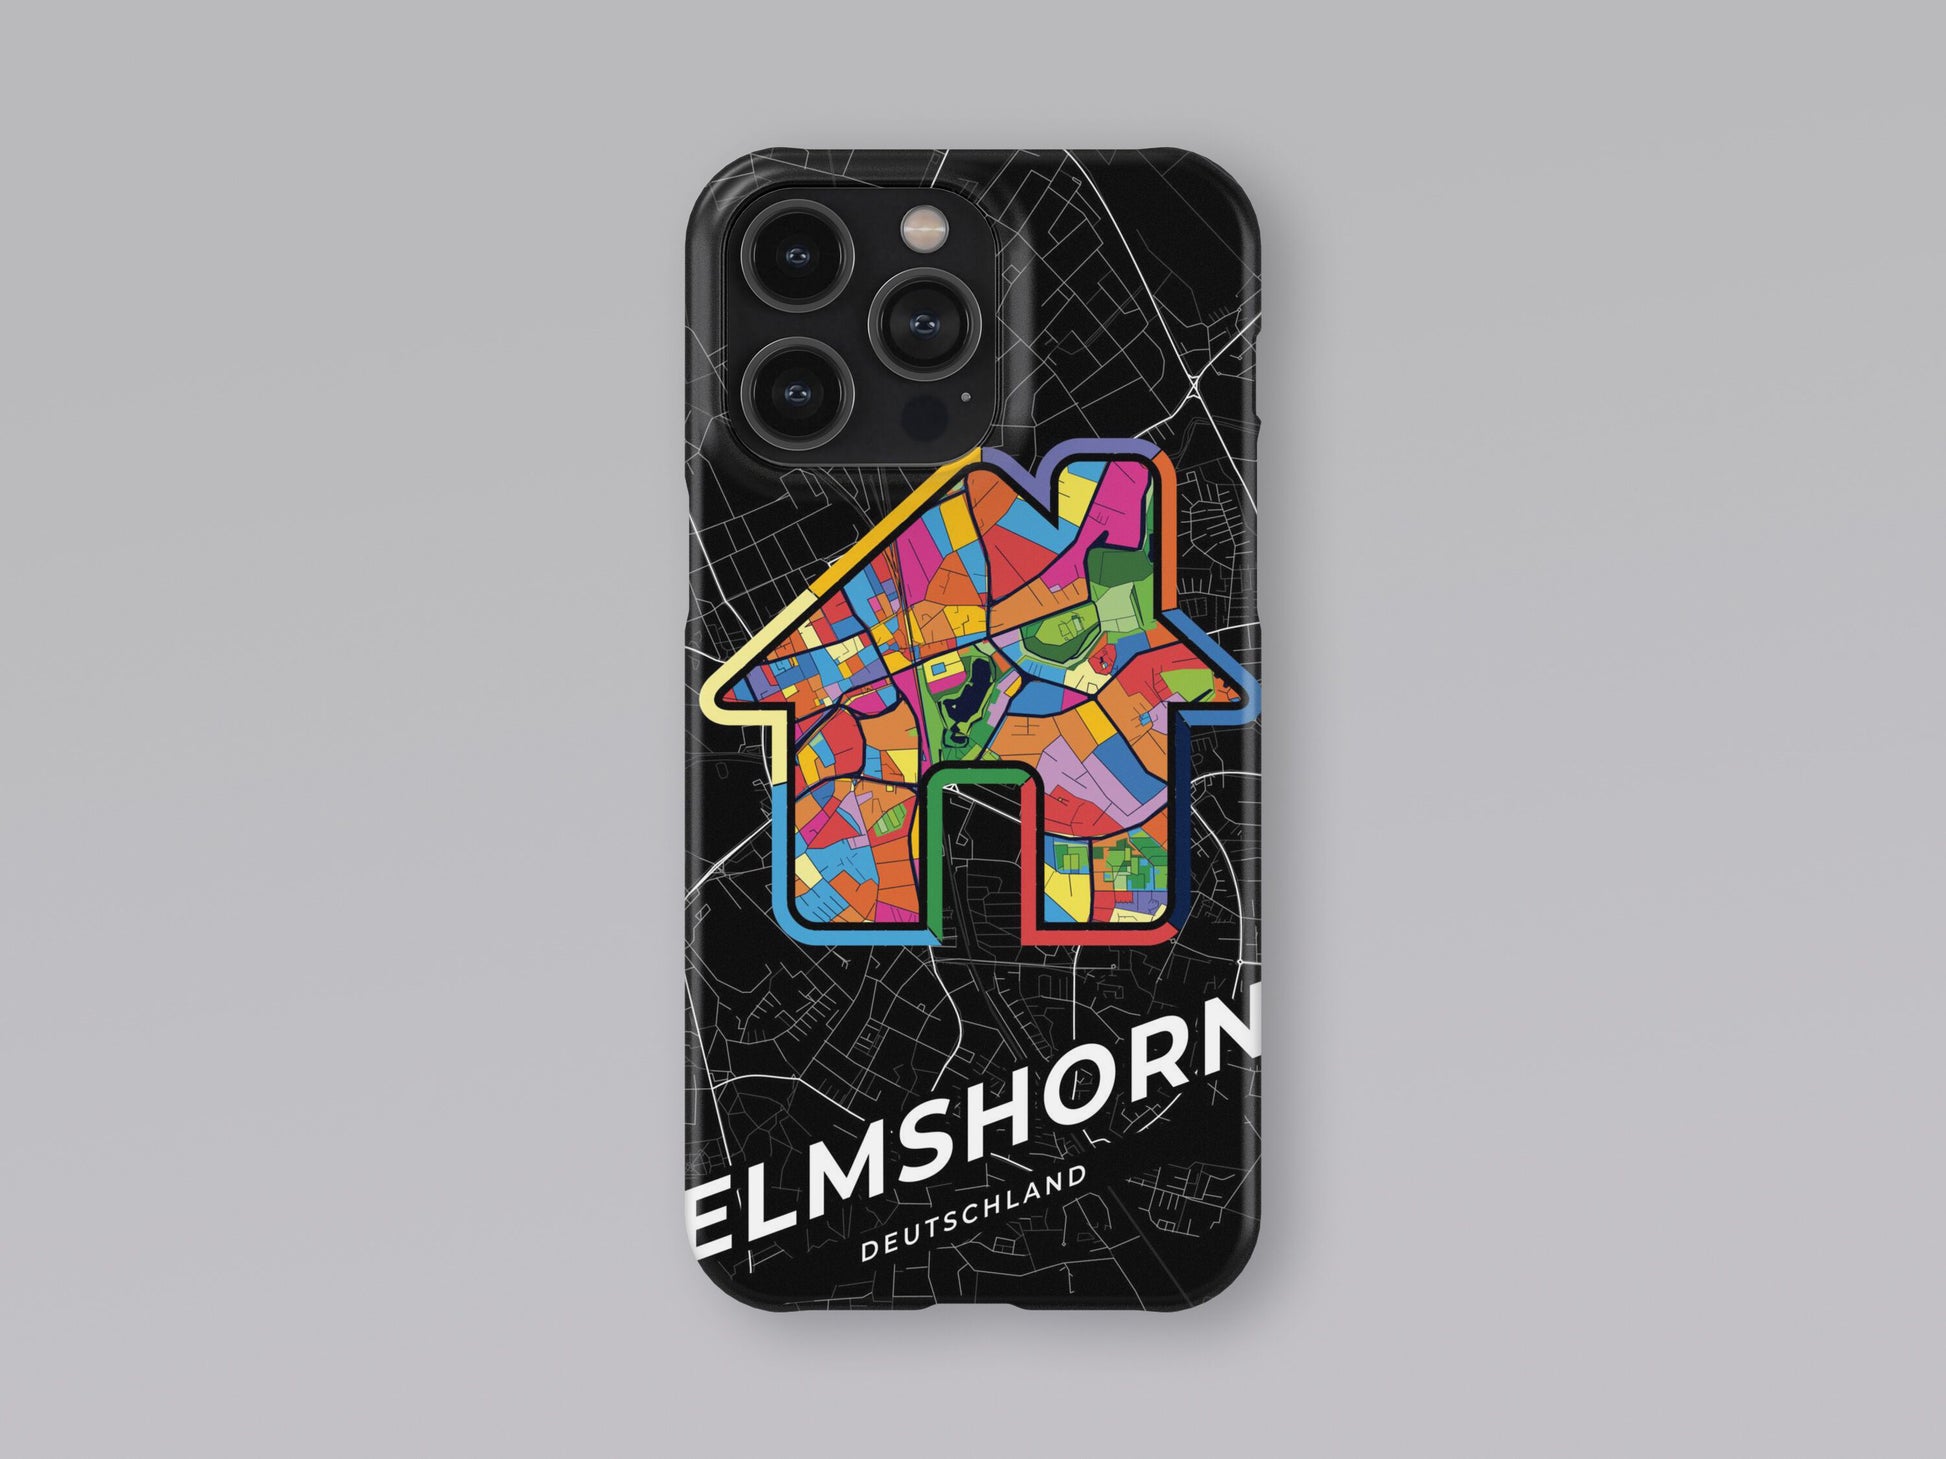 Elmshorn Deutschland slim phone case with colorful icon. Birthday, wedding or housewarming gift. Couple match cases. 3